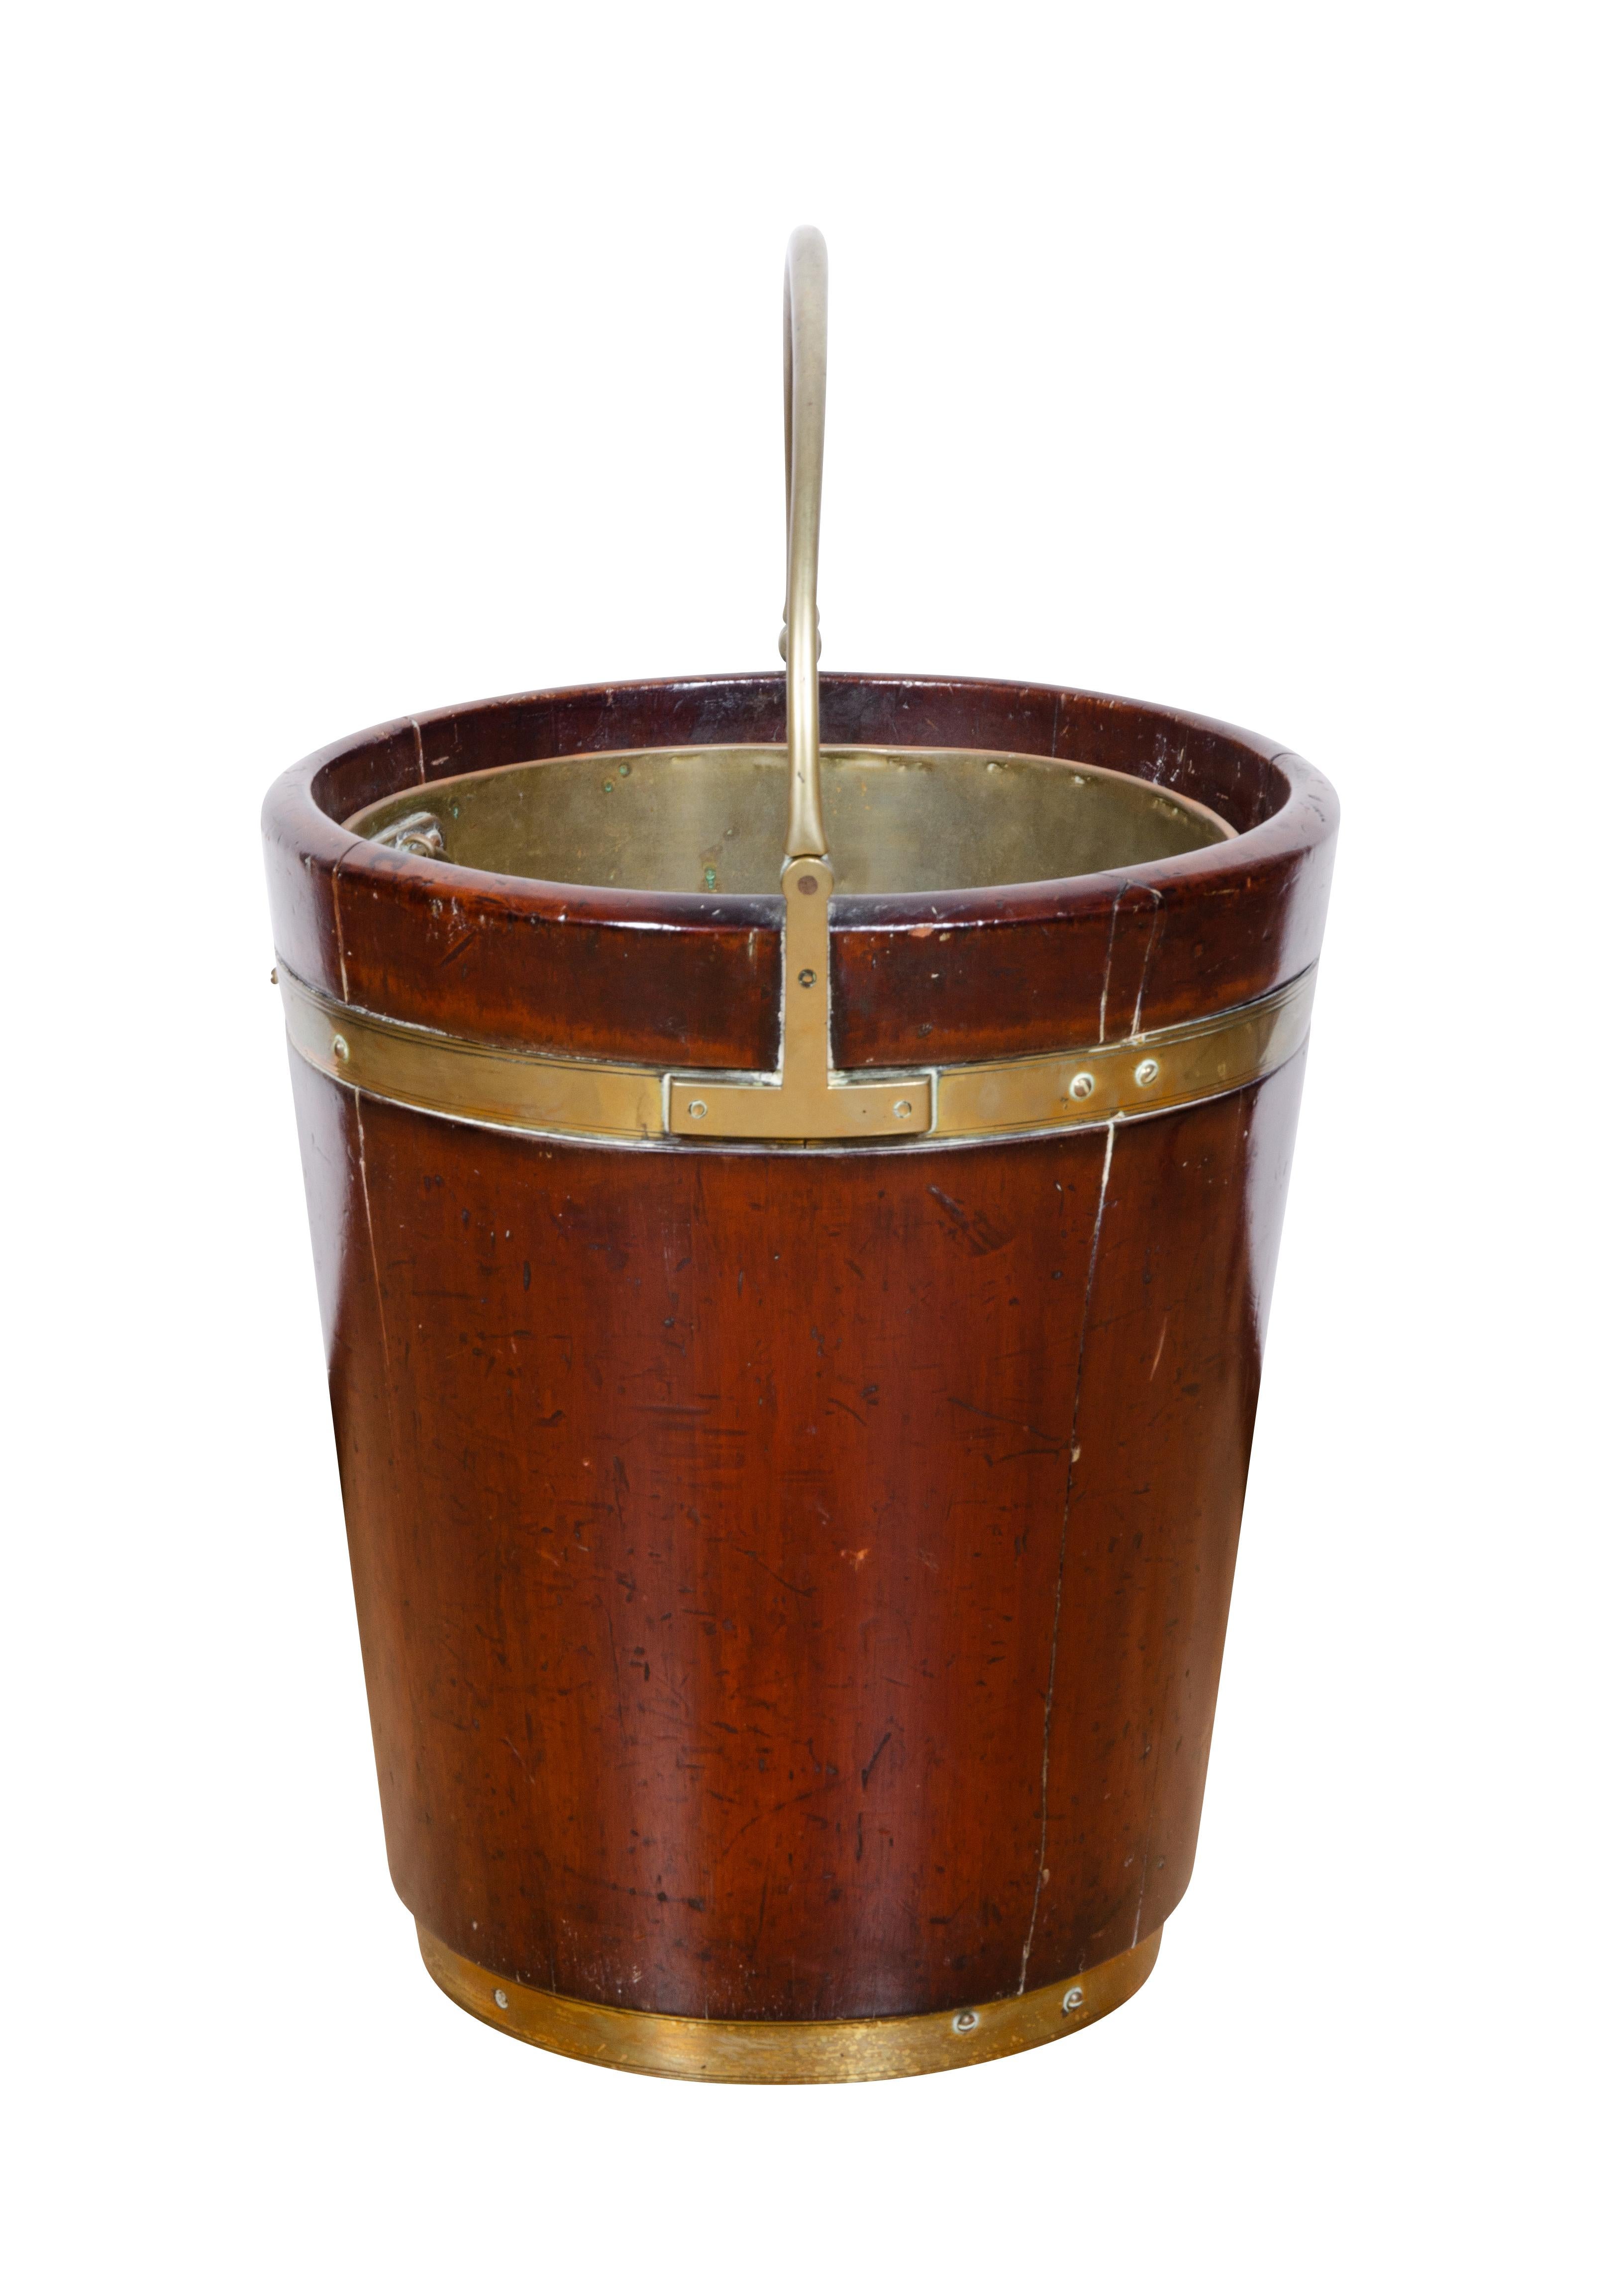 Pair of Regency Mahogany and Brass Bound Peat Buckets In Good Condition For Sale In Essex, MA